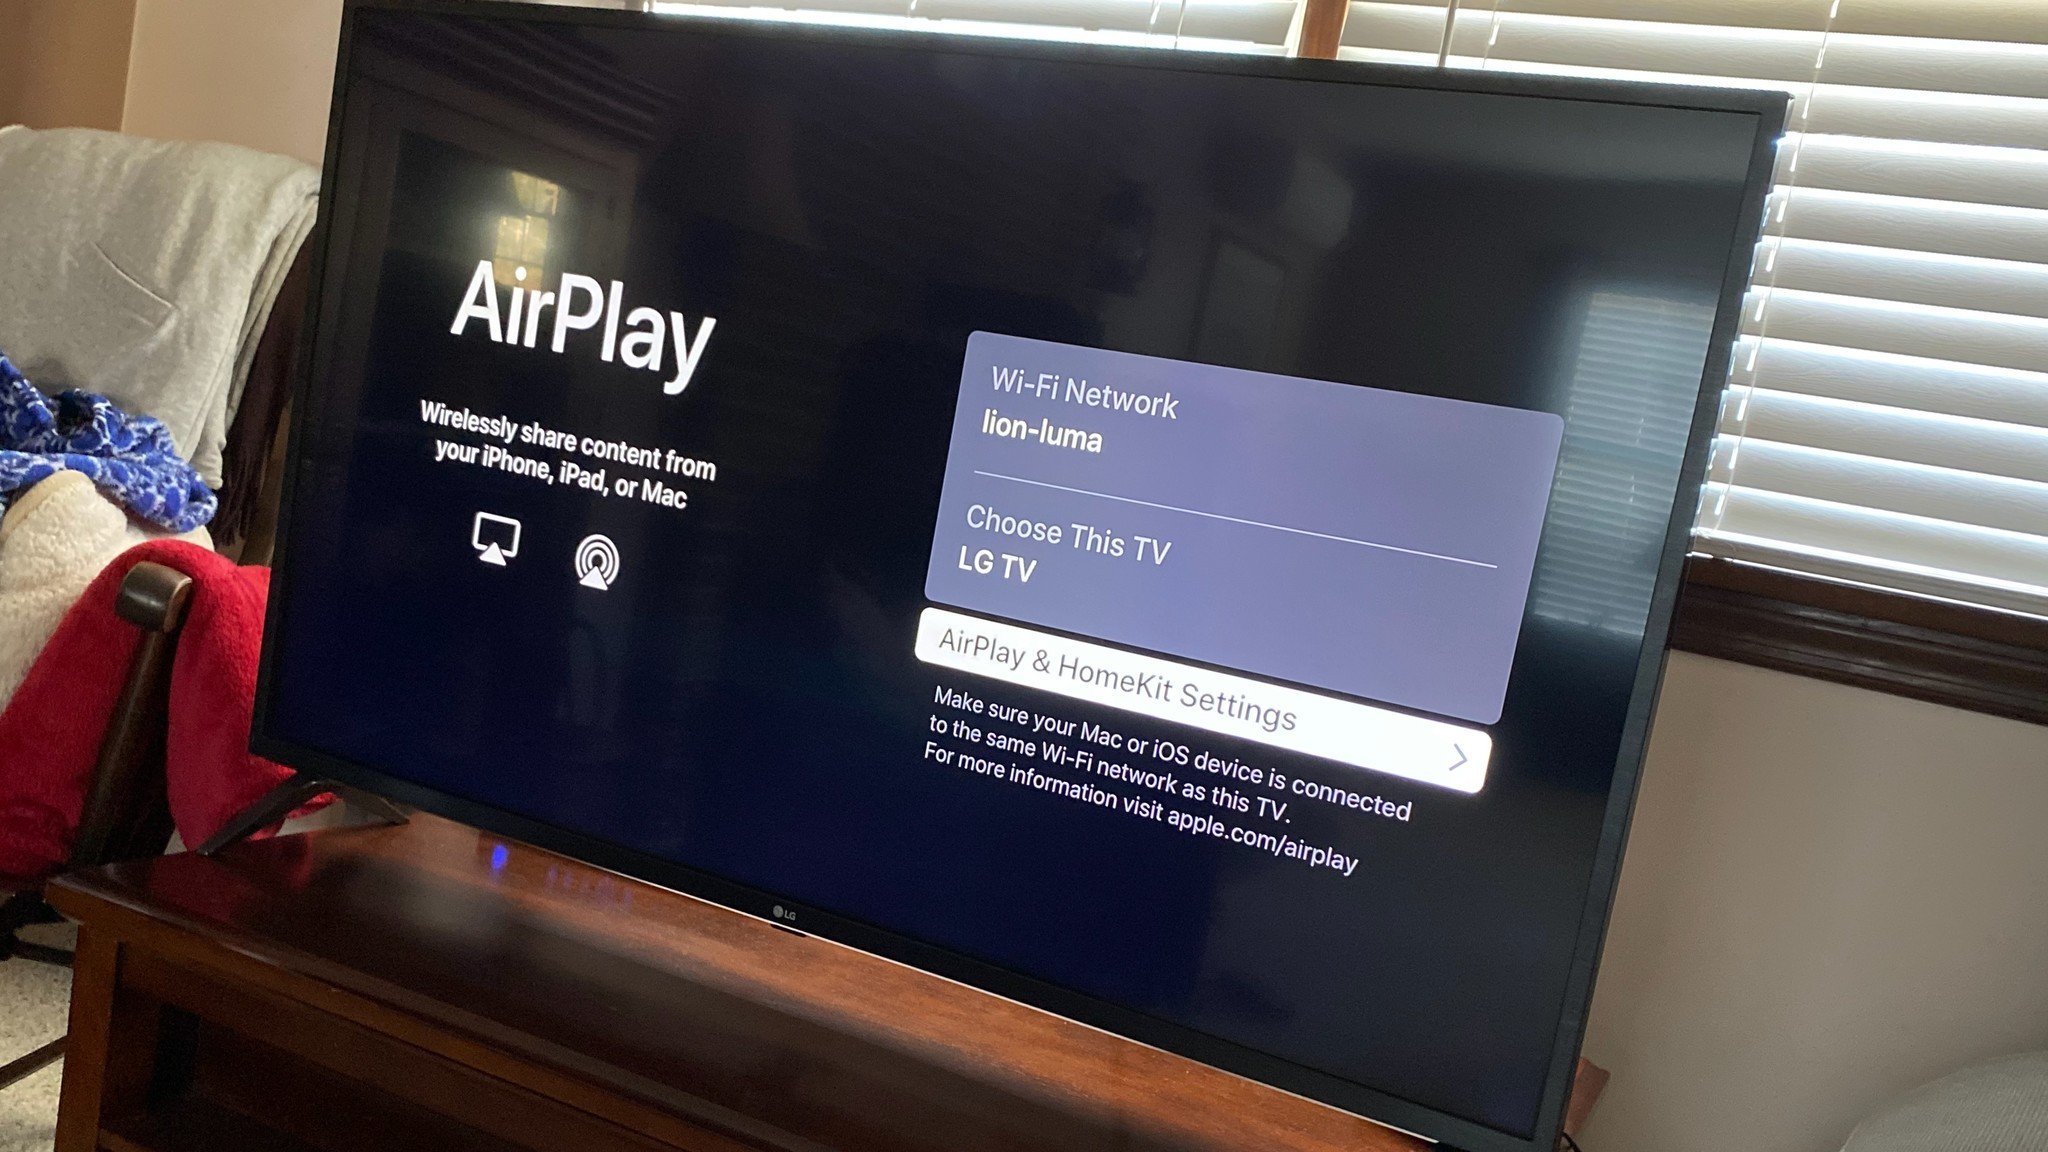 Airplay 2 And Hot For Smart Tvs, How To Mirror My Iphone Onto Lg Smart Tv